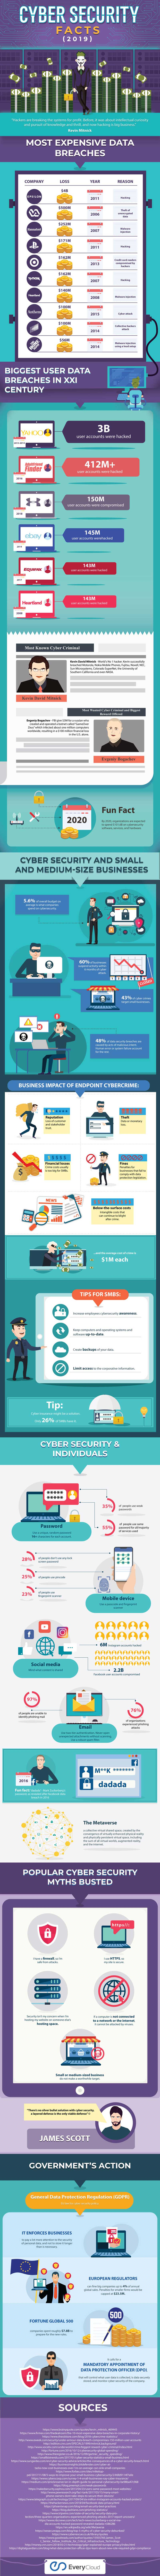 How Data Criminals Screw With Big Business [Infographic]